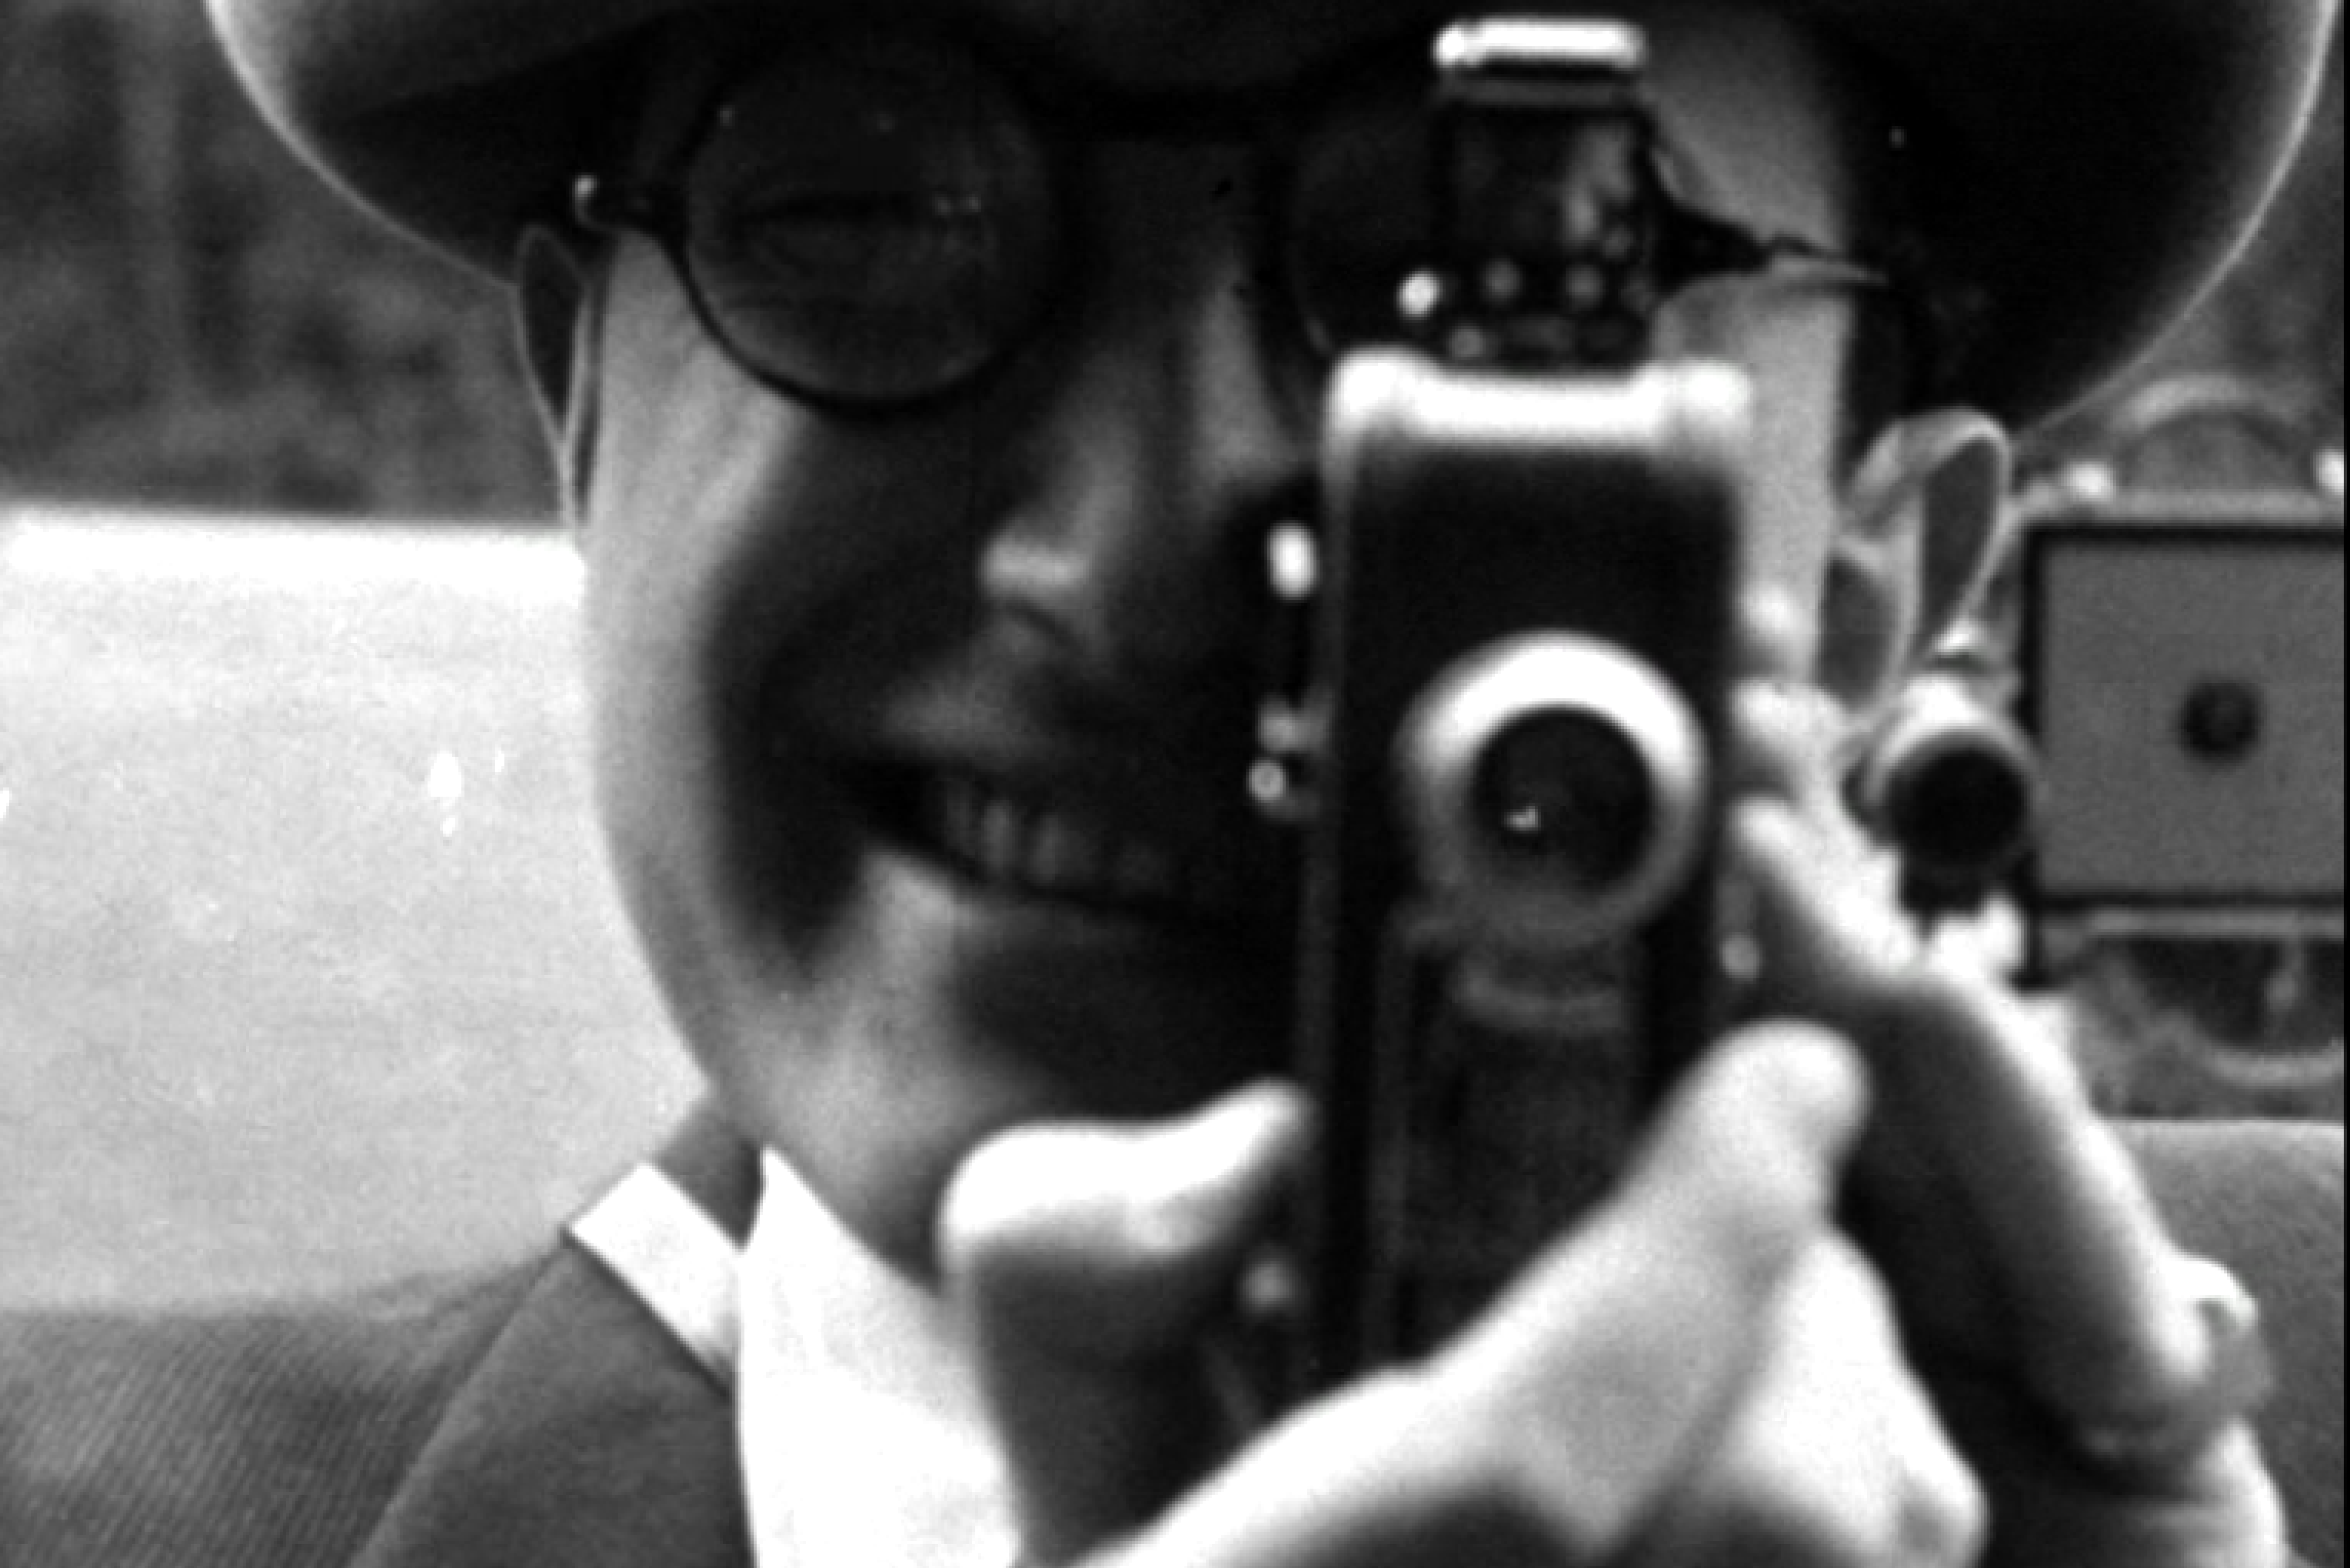 Black and white photo: A man smiling looks through the viewfinder of a historic N8 camera.